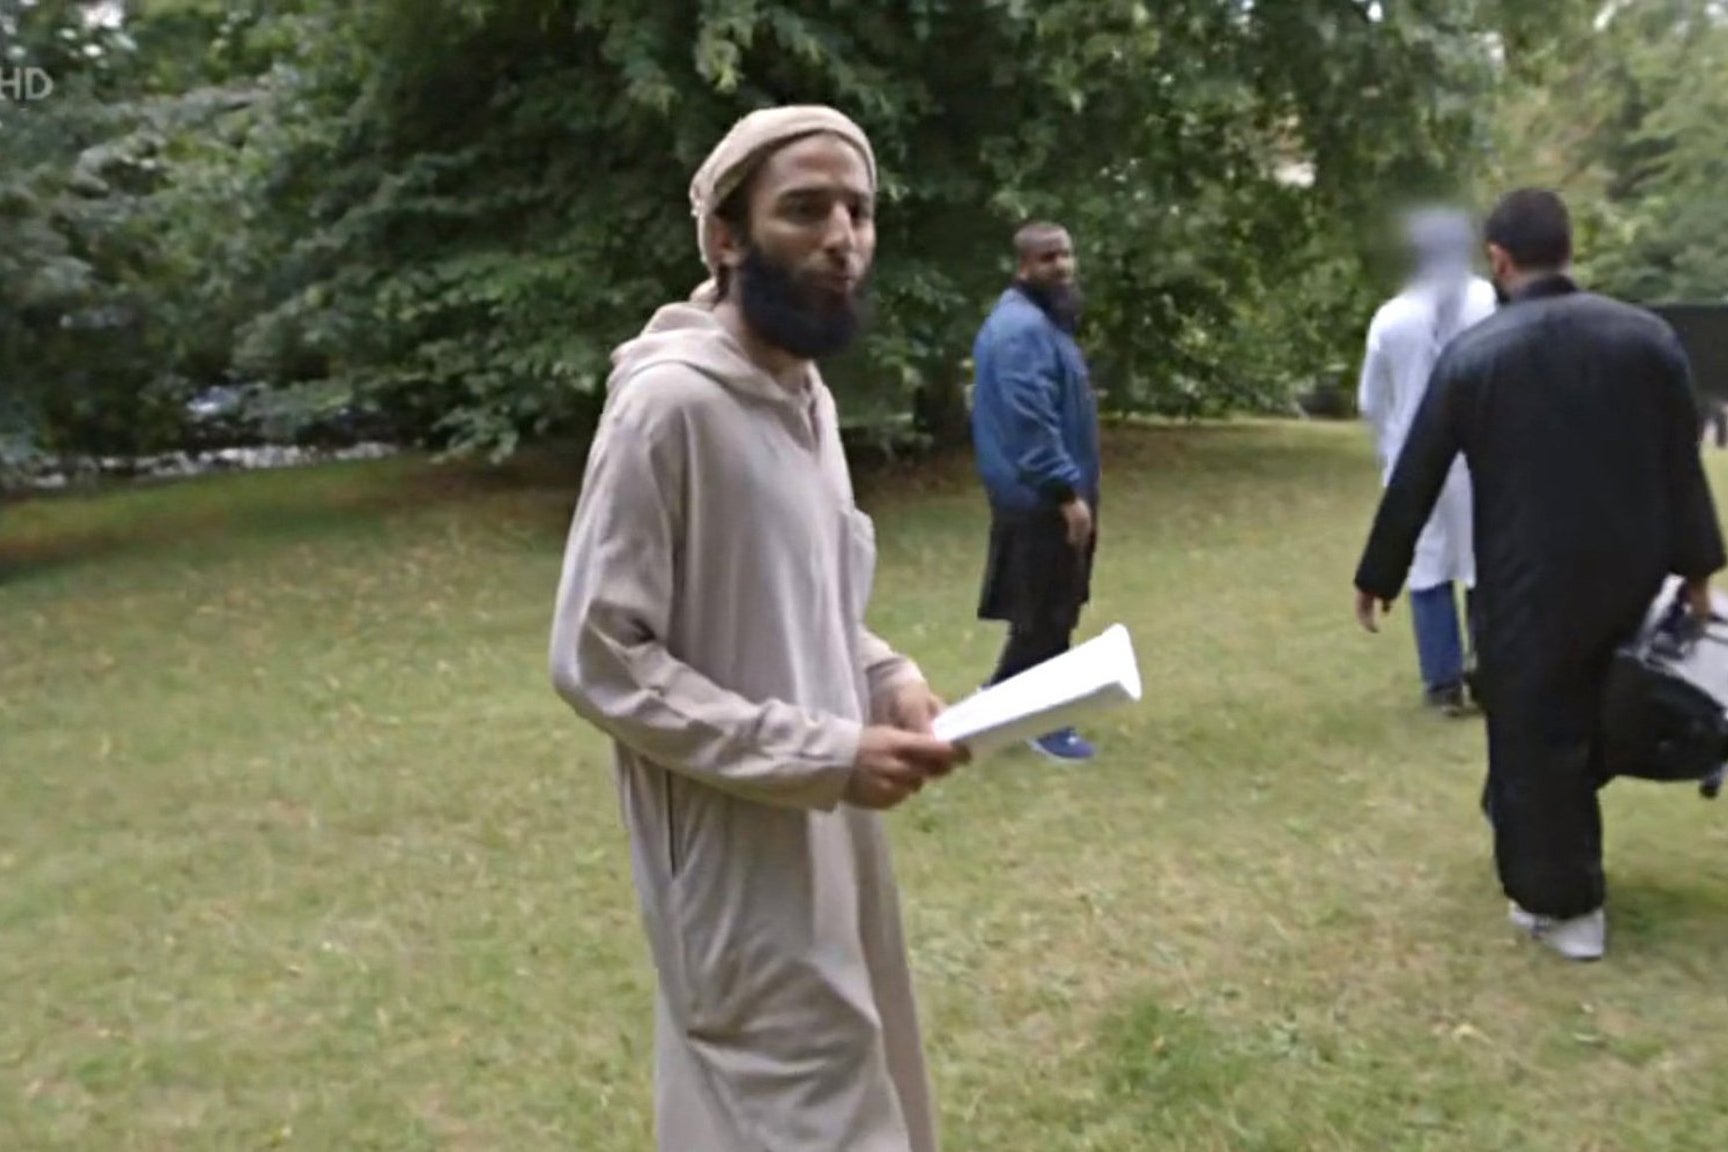 Khuram Butt appearing in a Channel 4 documentary called ‘The Jihadis Next Door’